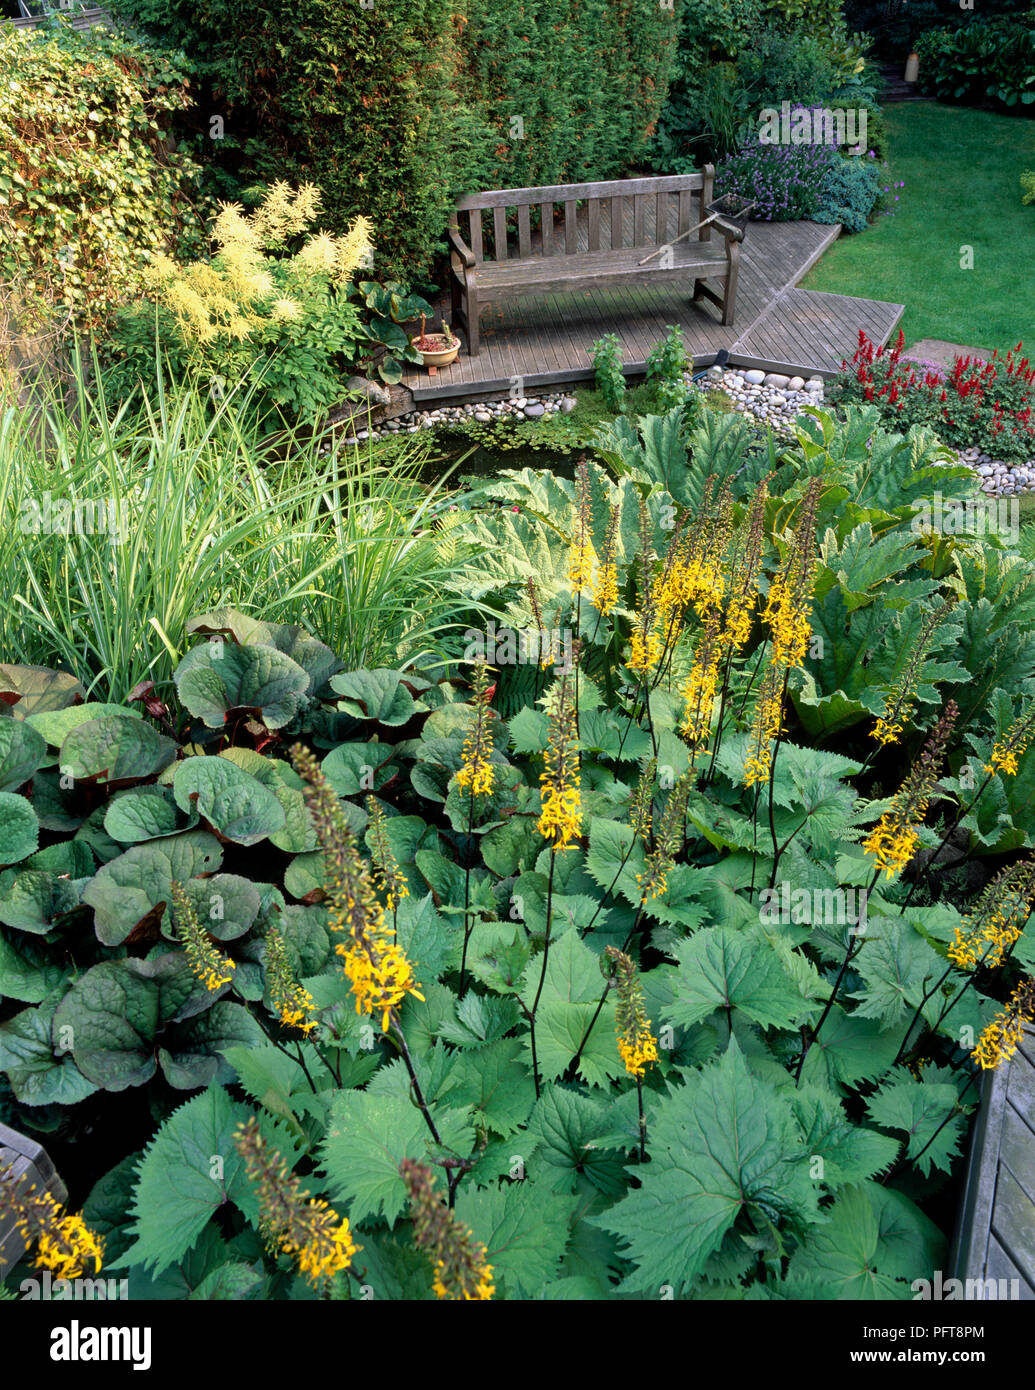 Garden pond with water lilies and yellow Ligularia sp. (Leopard plant) in foreground, Miscanthus sinensis 'Zebrinus' (Zebra grass) and jagged leaves of Gunnera manicata behind, and bench in background Stock Photo